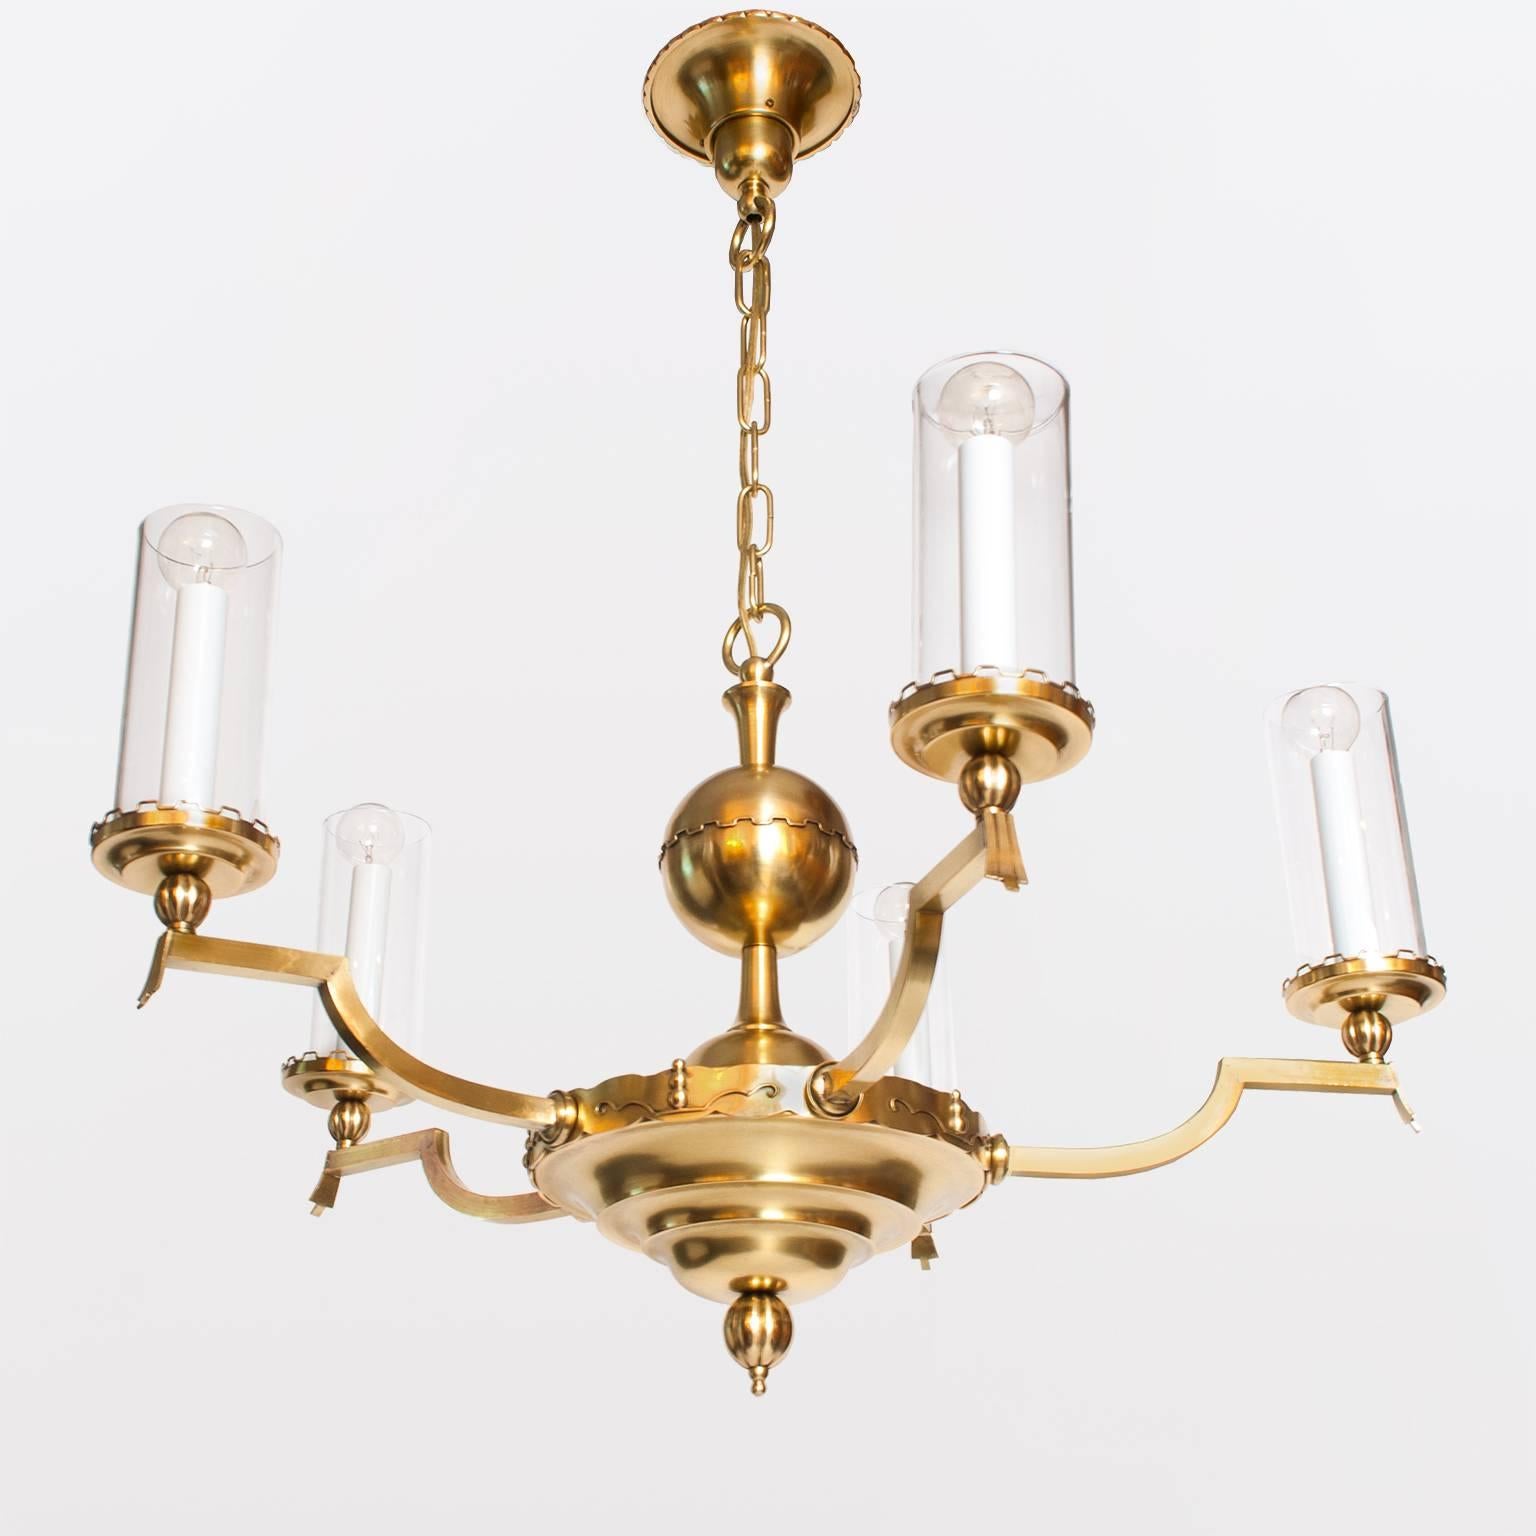 Scandinavian Modern, Swedish art deco five-arm chandelier in polished brass made circa late 1920s. Each arm is detailed with a stylized drape, a reeded sphere, a stepped bobeche and a candelabra base sleeve surround by a glass cylinder shade. The